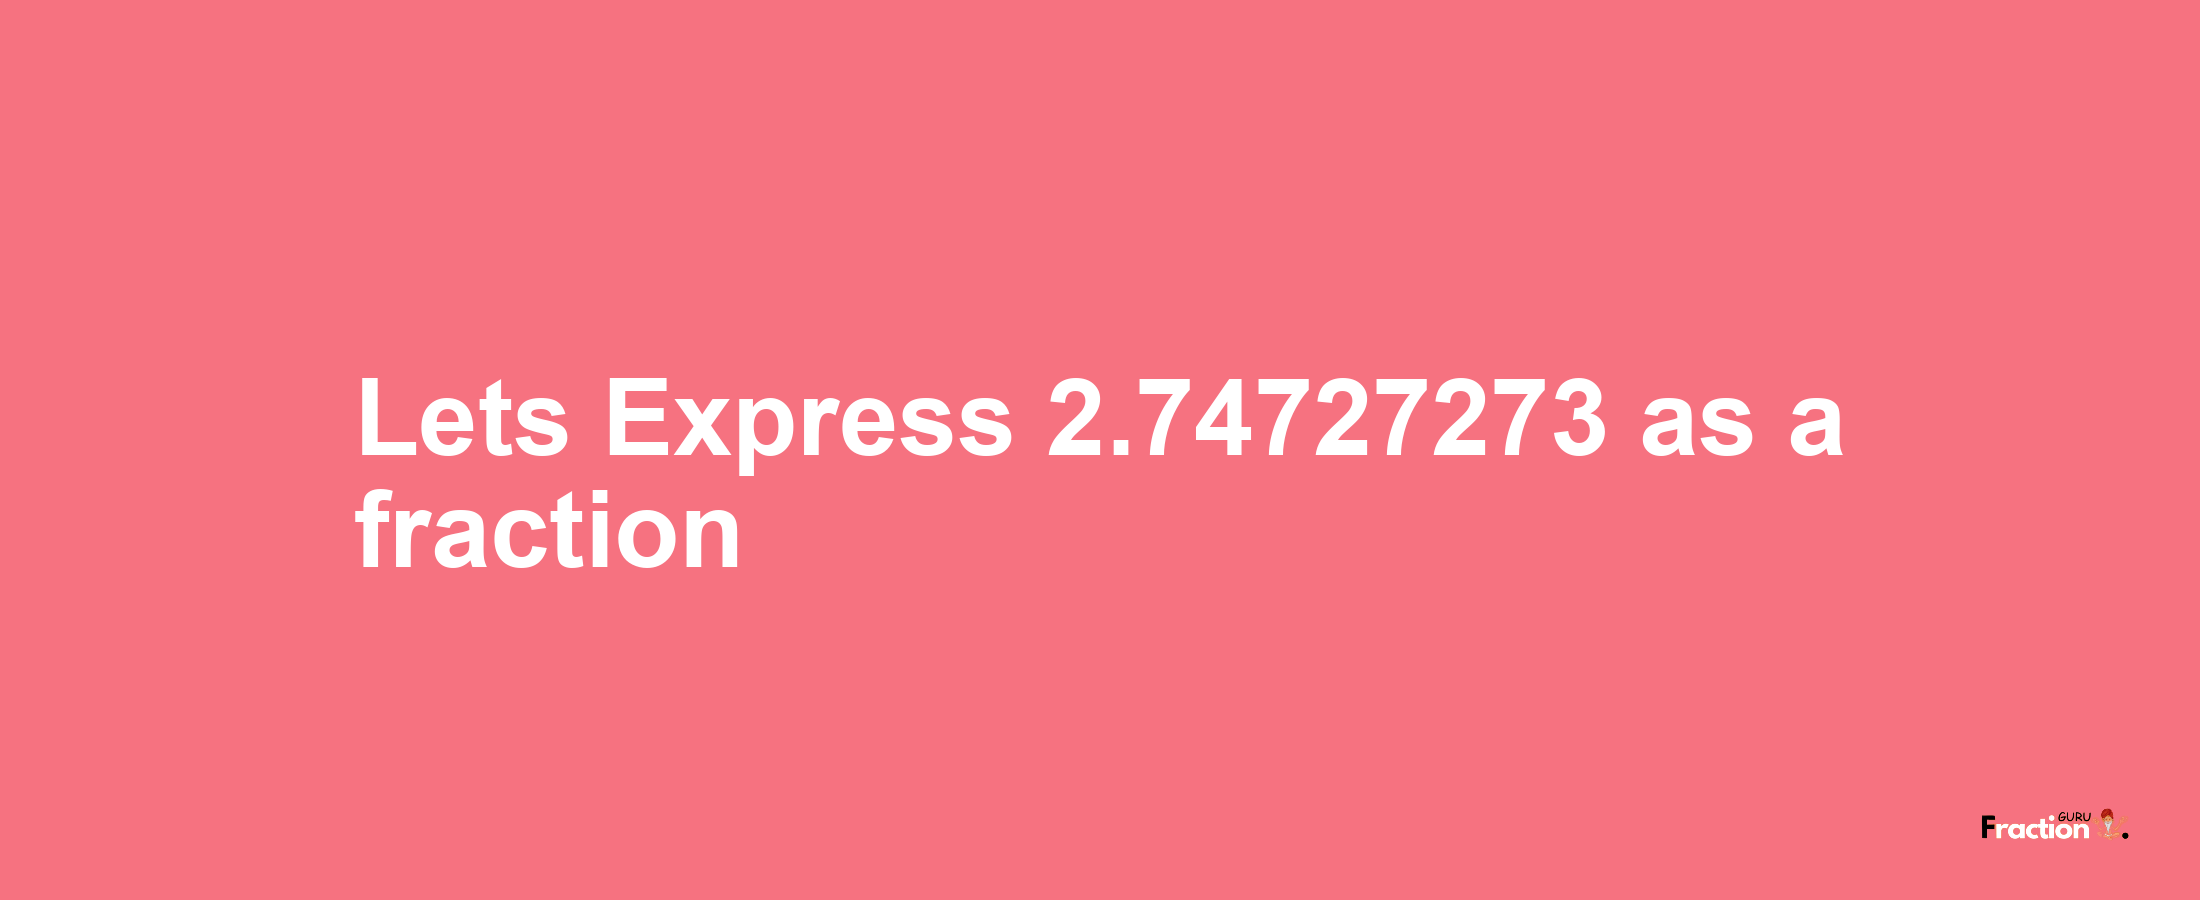 Lets Express 2.74727273 as afraction